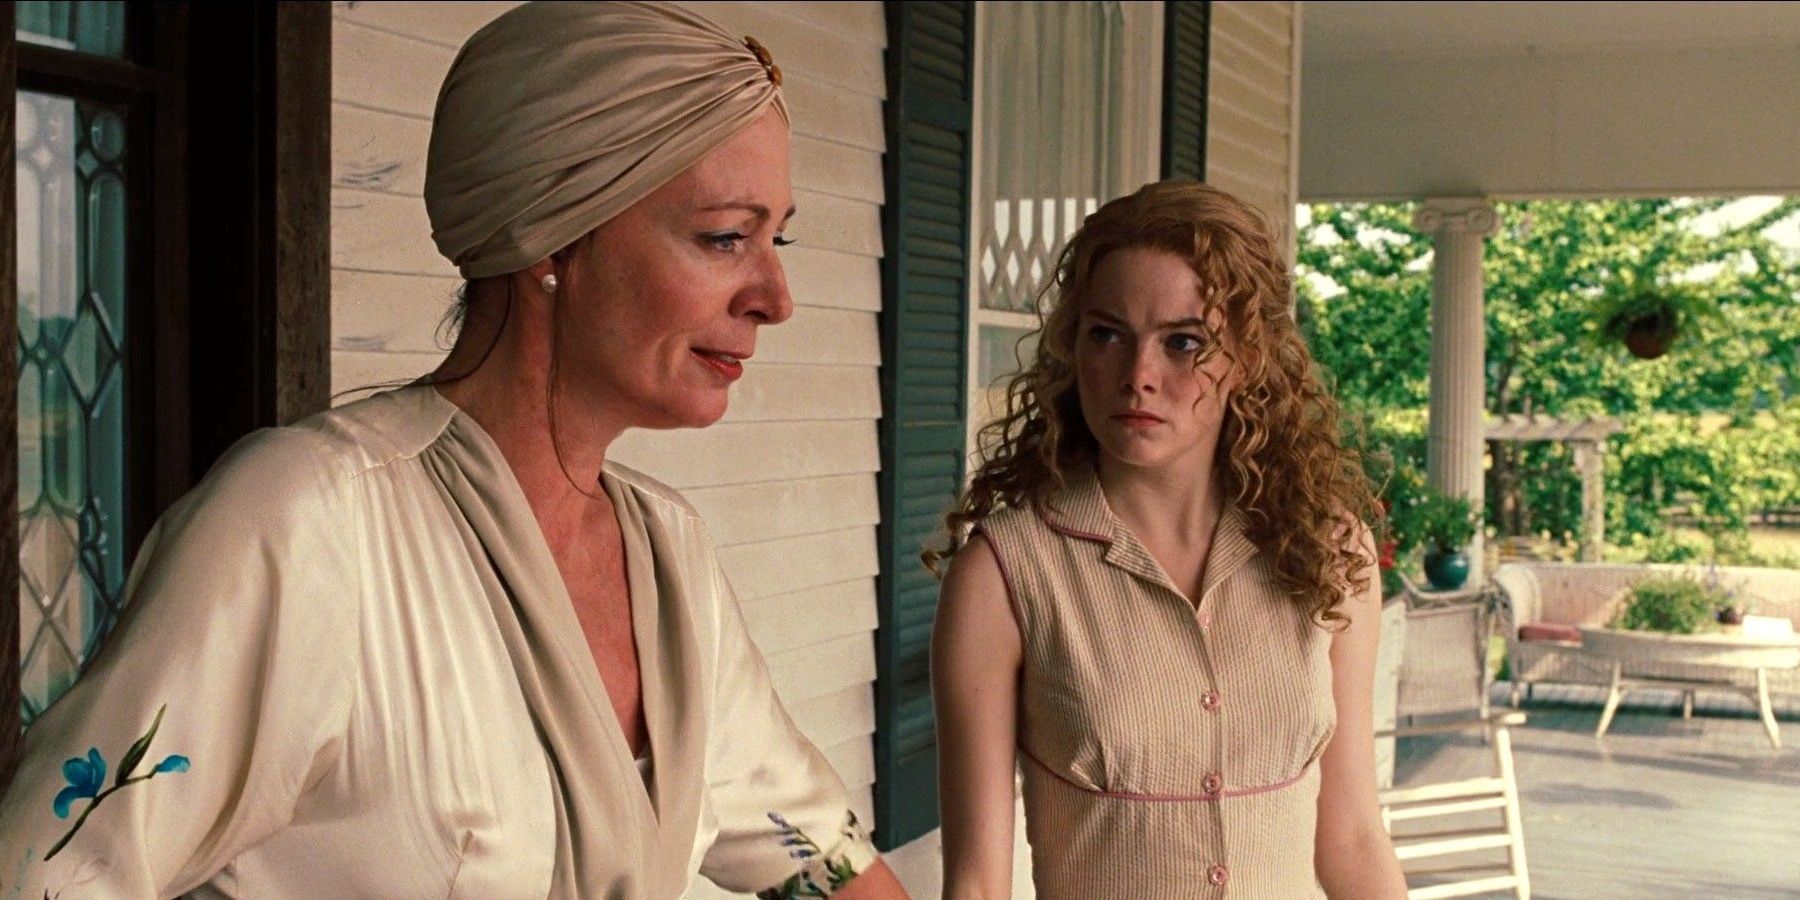 Emma Stone on the porch in The Help